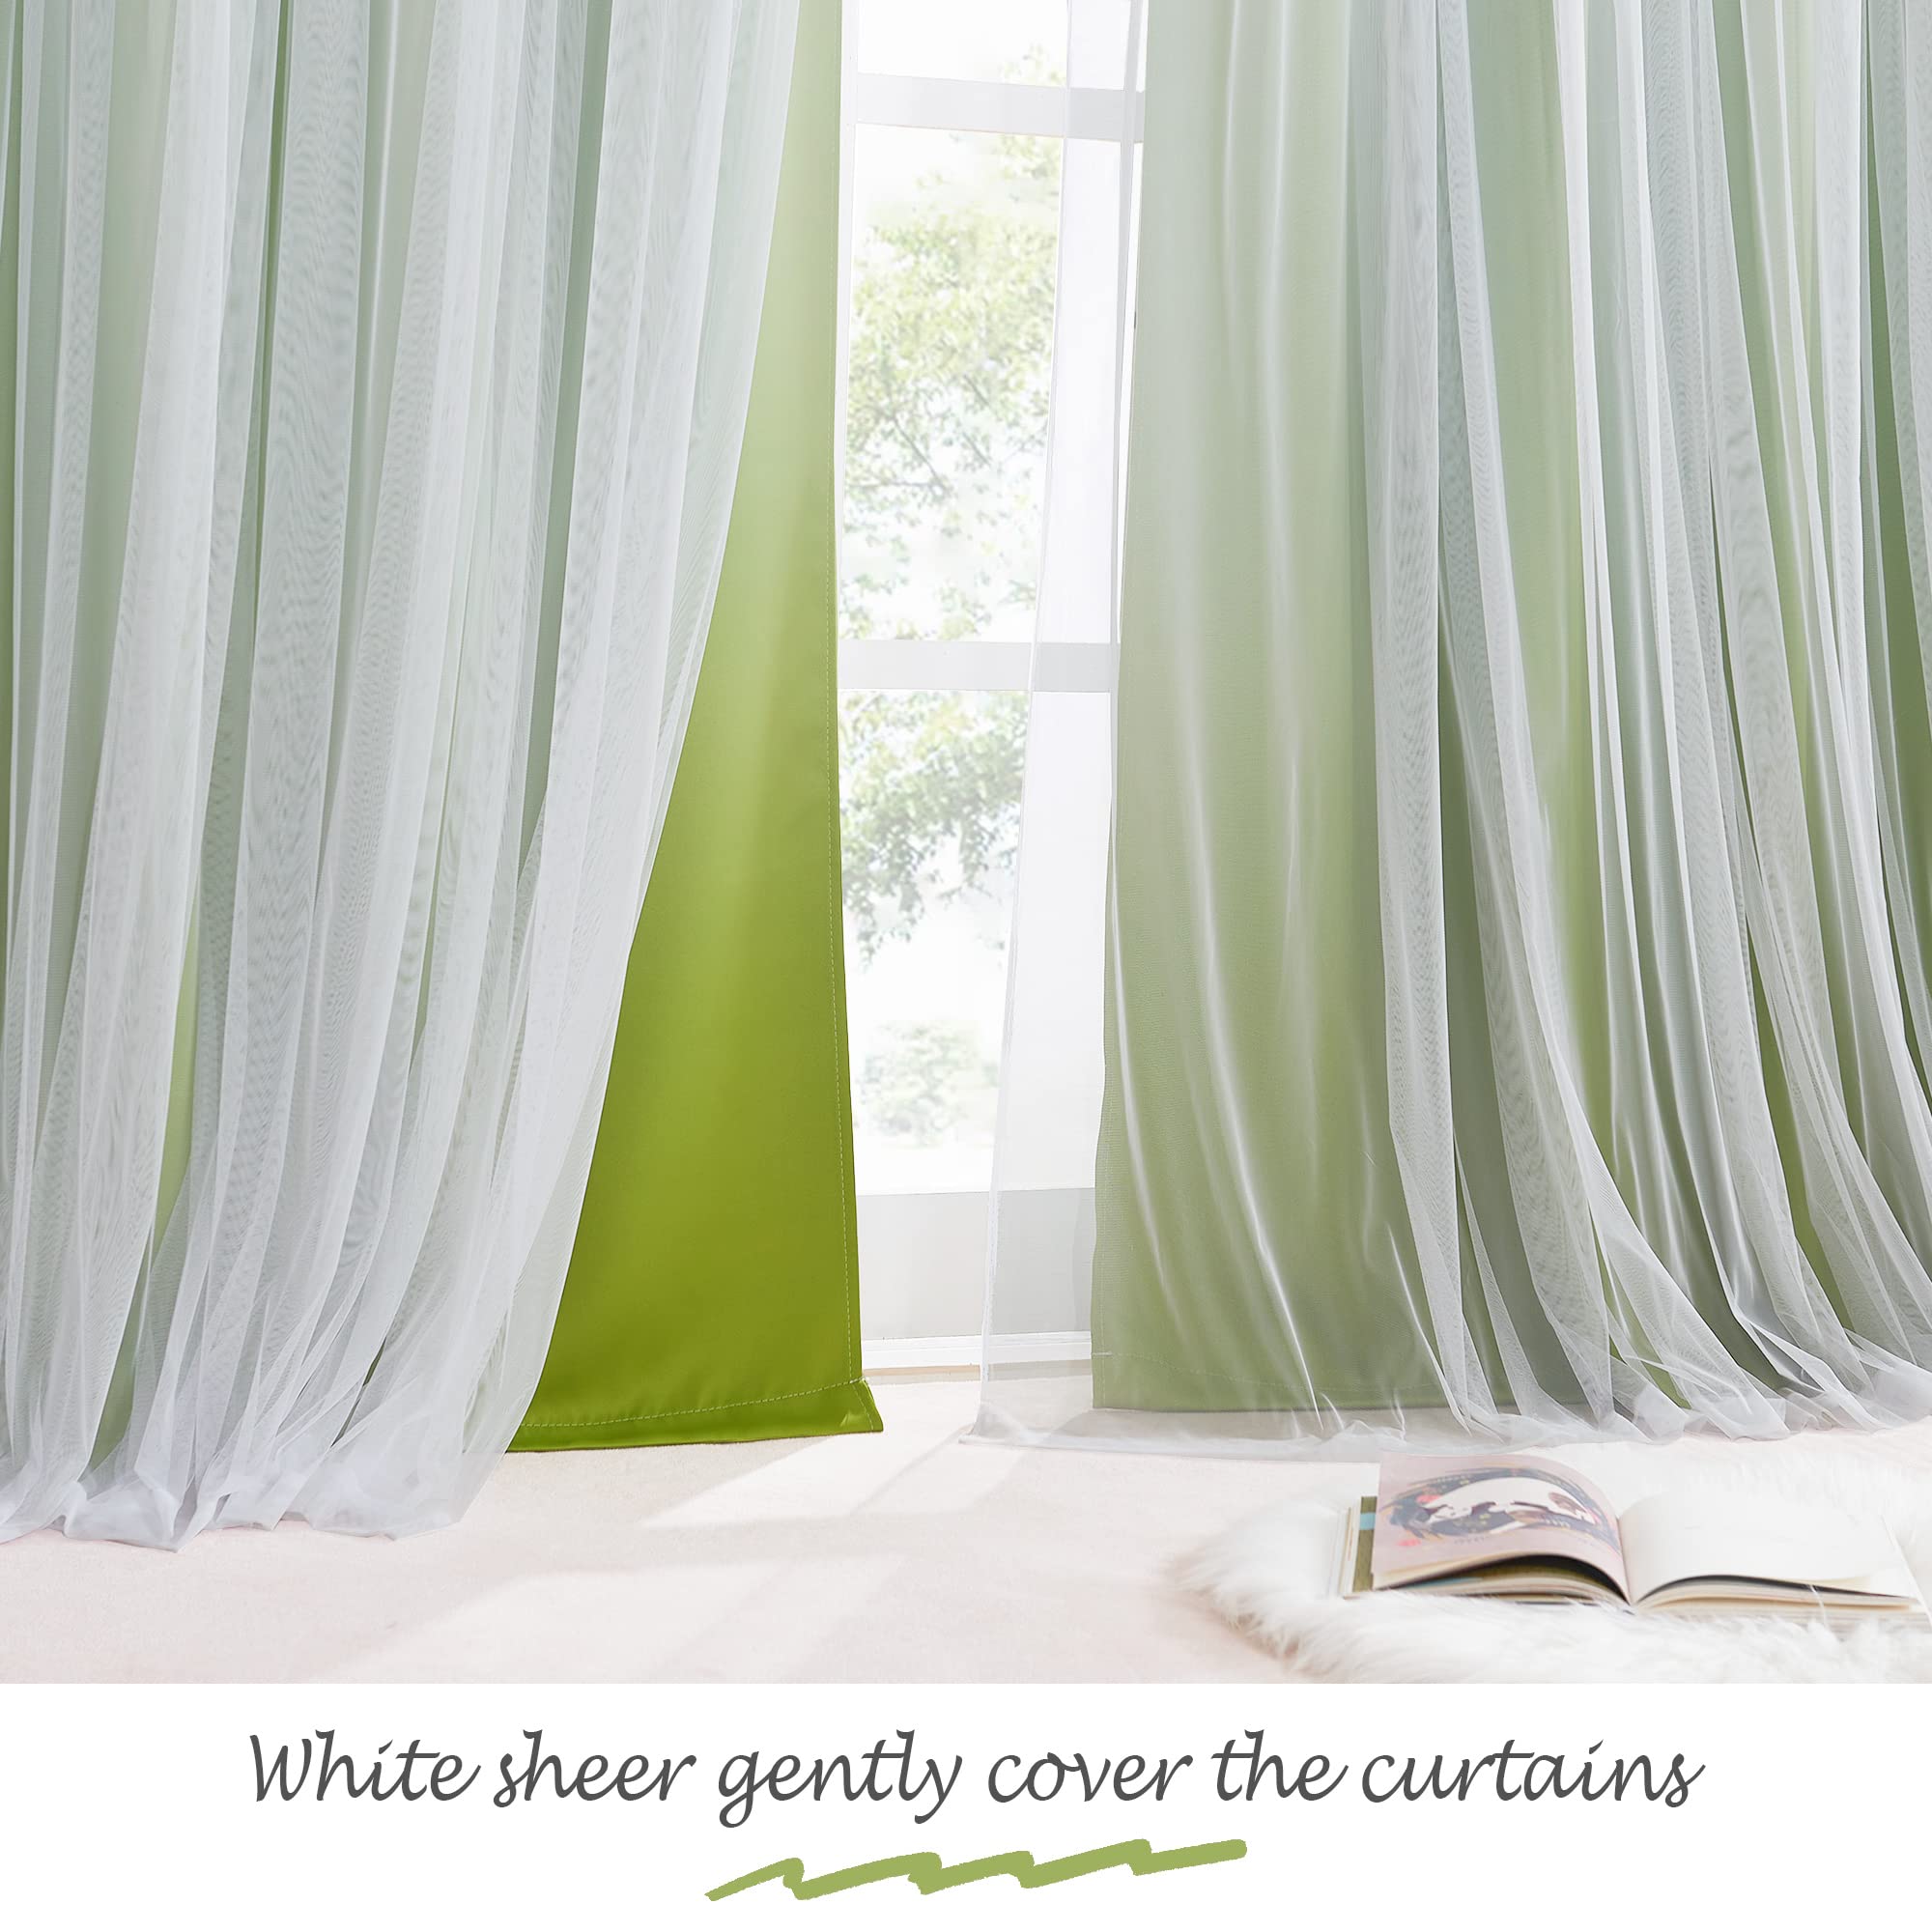 Ombre Blackout  Curtain With Sheer Voile Curtain Overlay 2 Panels